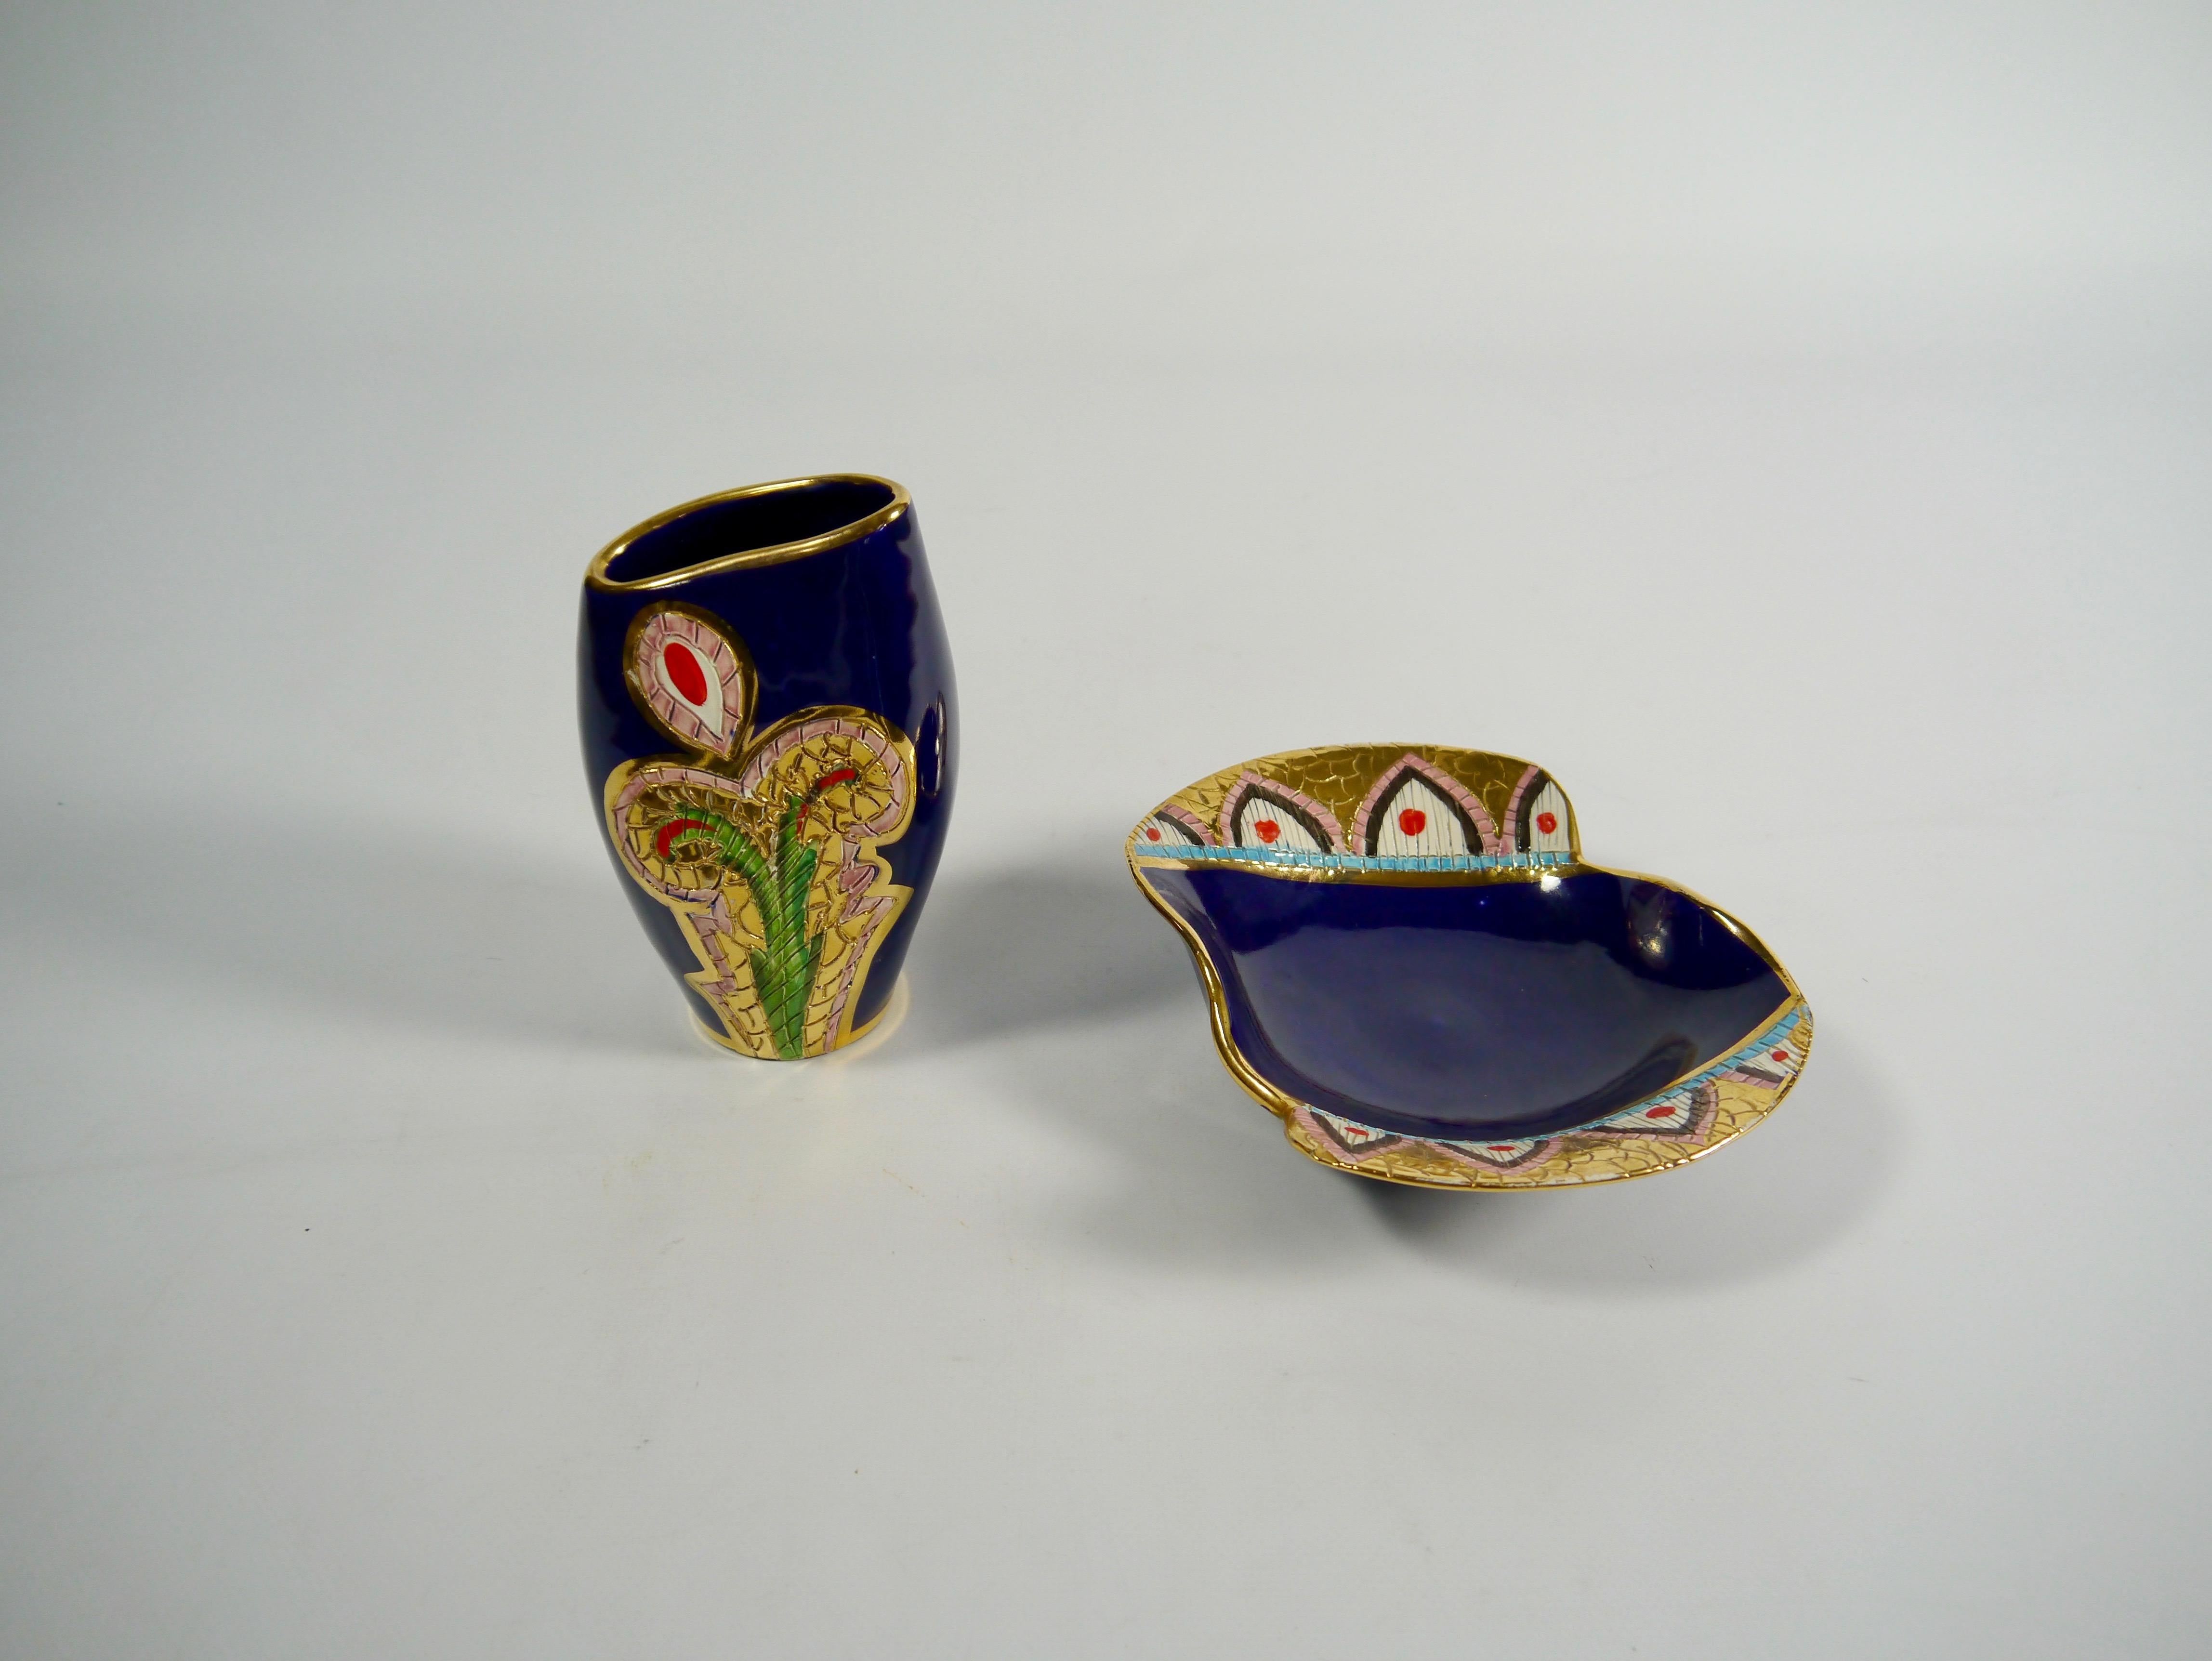 Two charming 1950s midnight blue porcelain vessels, made by the Italian porcelain studio Fiamma from Sesto Florentino, Italy. Hand painted pattern in gold, green and red. Marked with makers mark and 2339 resp. 2342, 